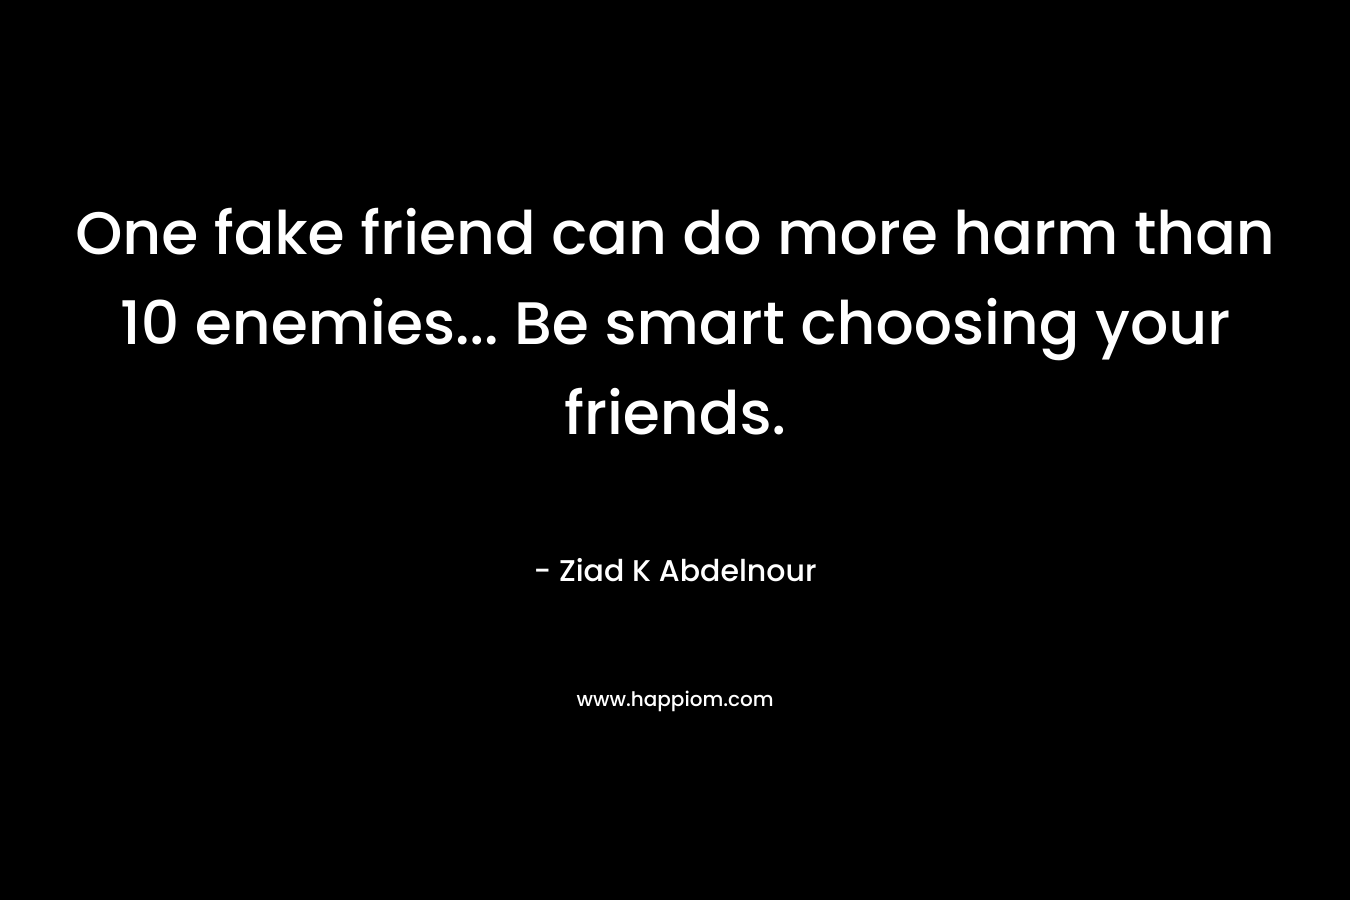 One fake friend can do more harm than 10 enemies... Be smart choosing your friends.